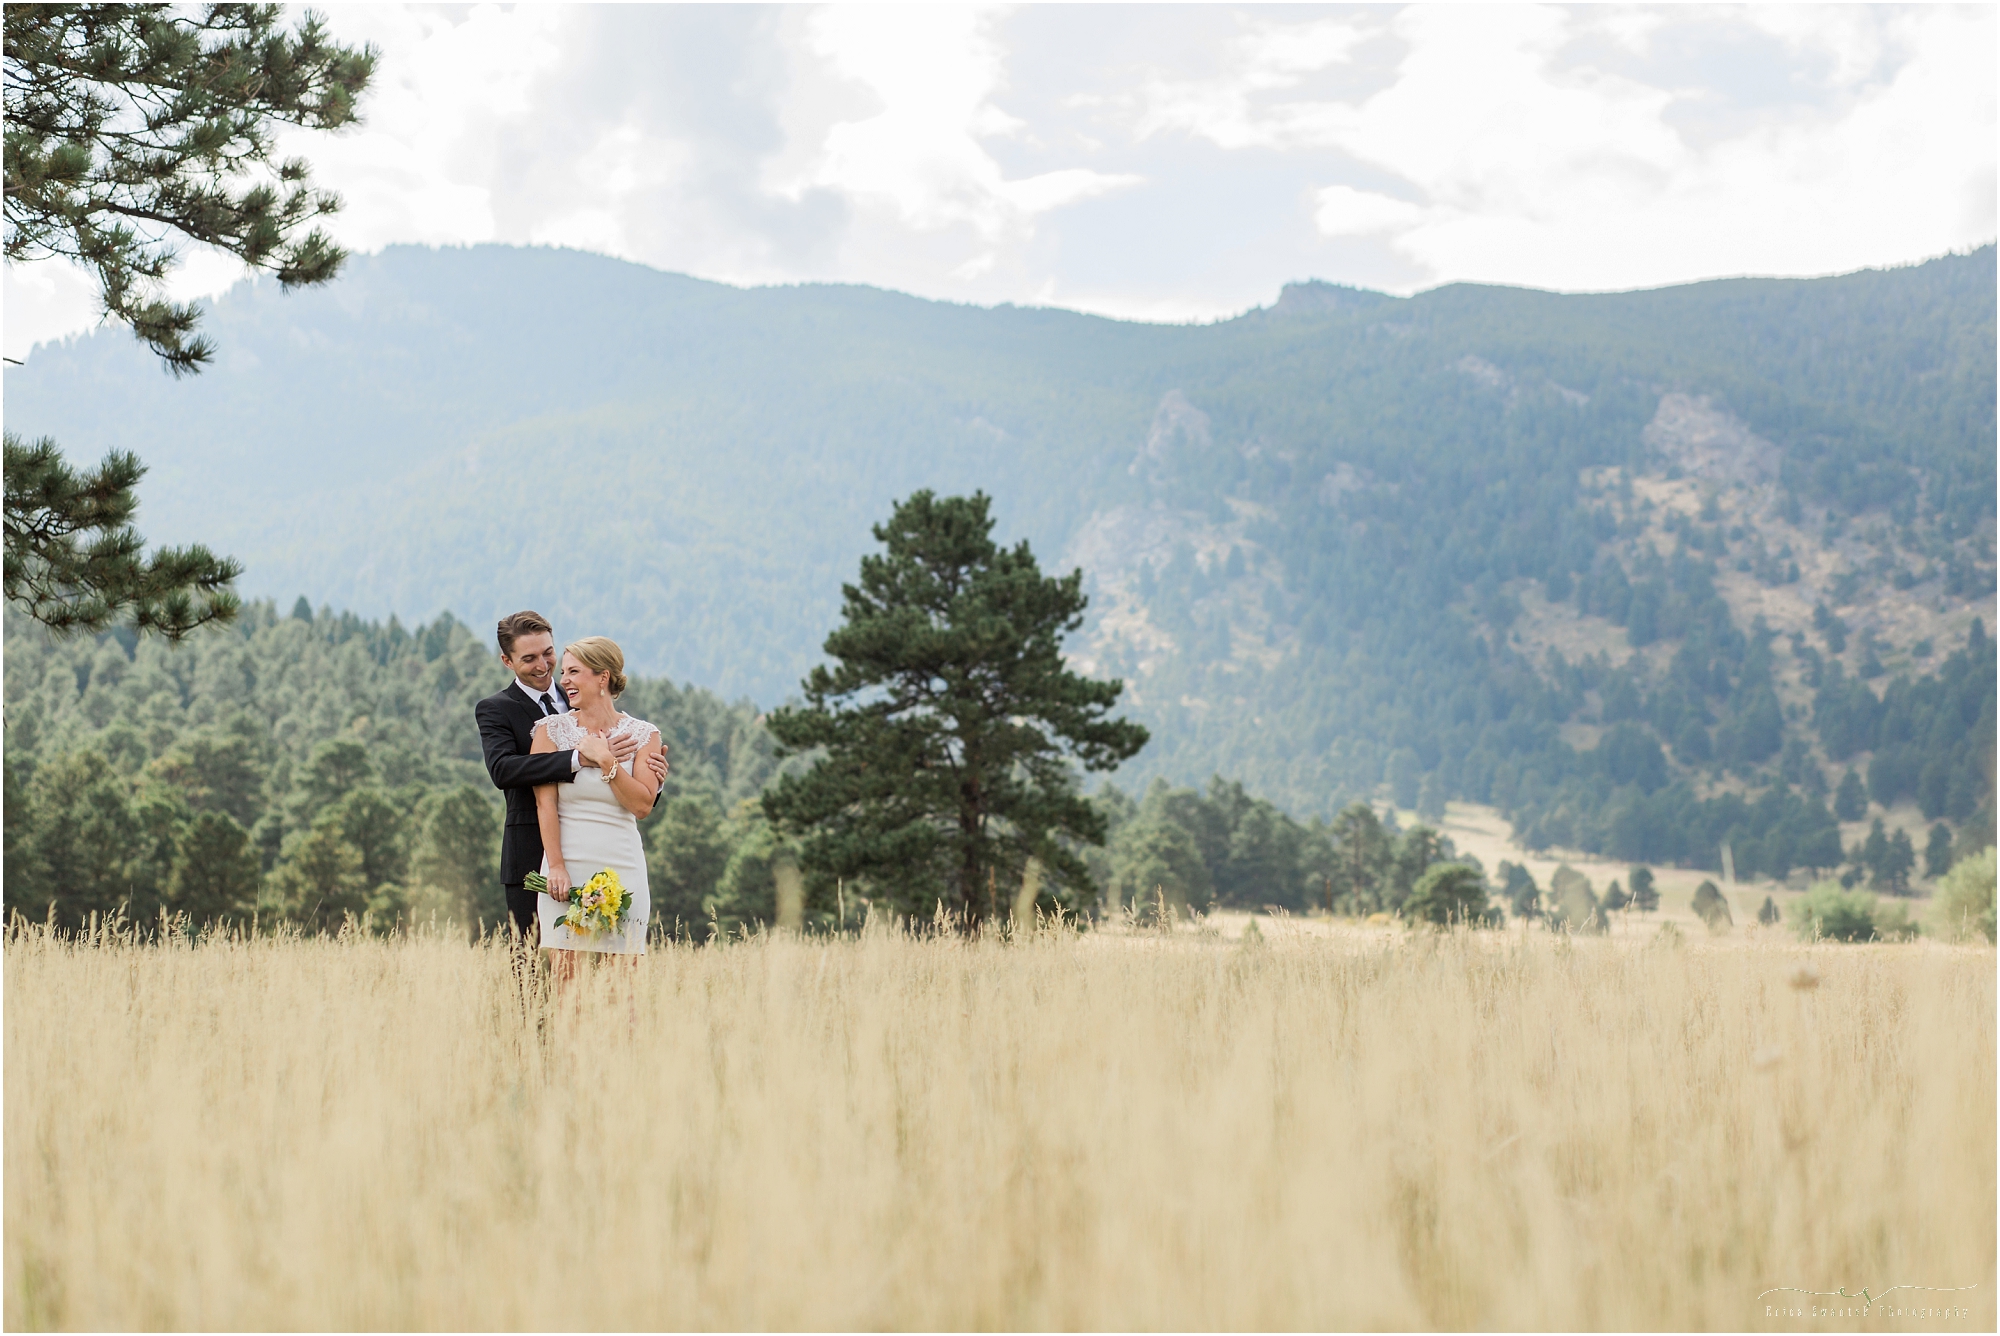 A gorgeous mountain backdrop at this Evergeen CO wedding styled shoot by photographer Erica Swantek. 